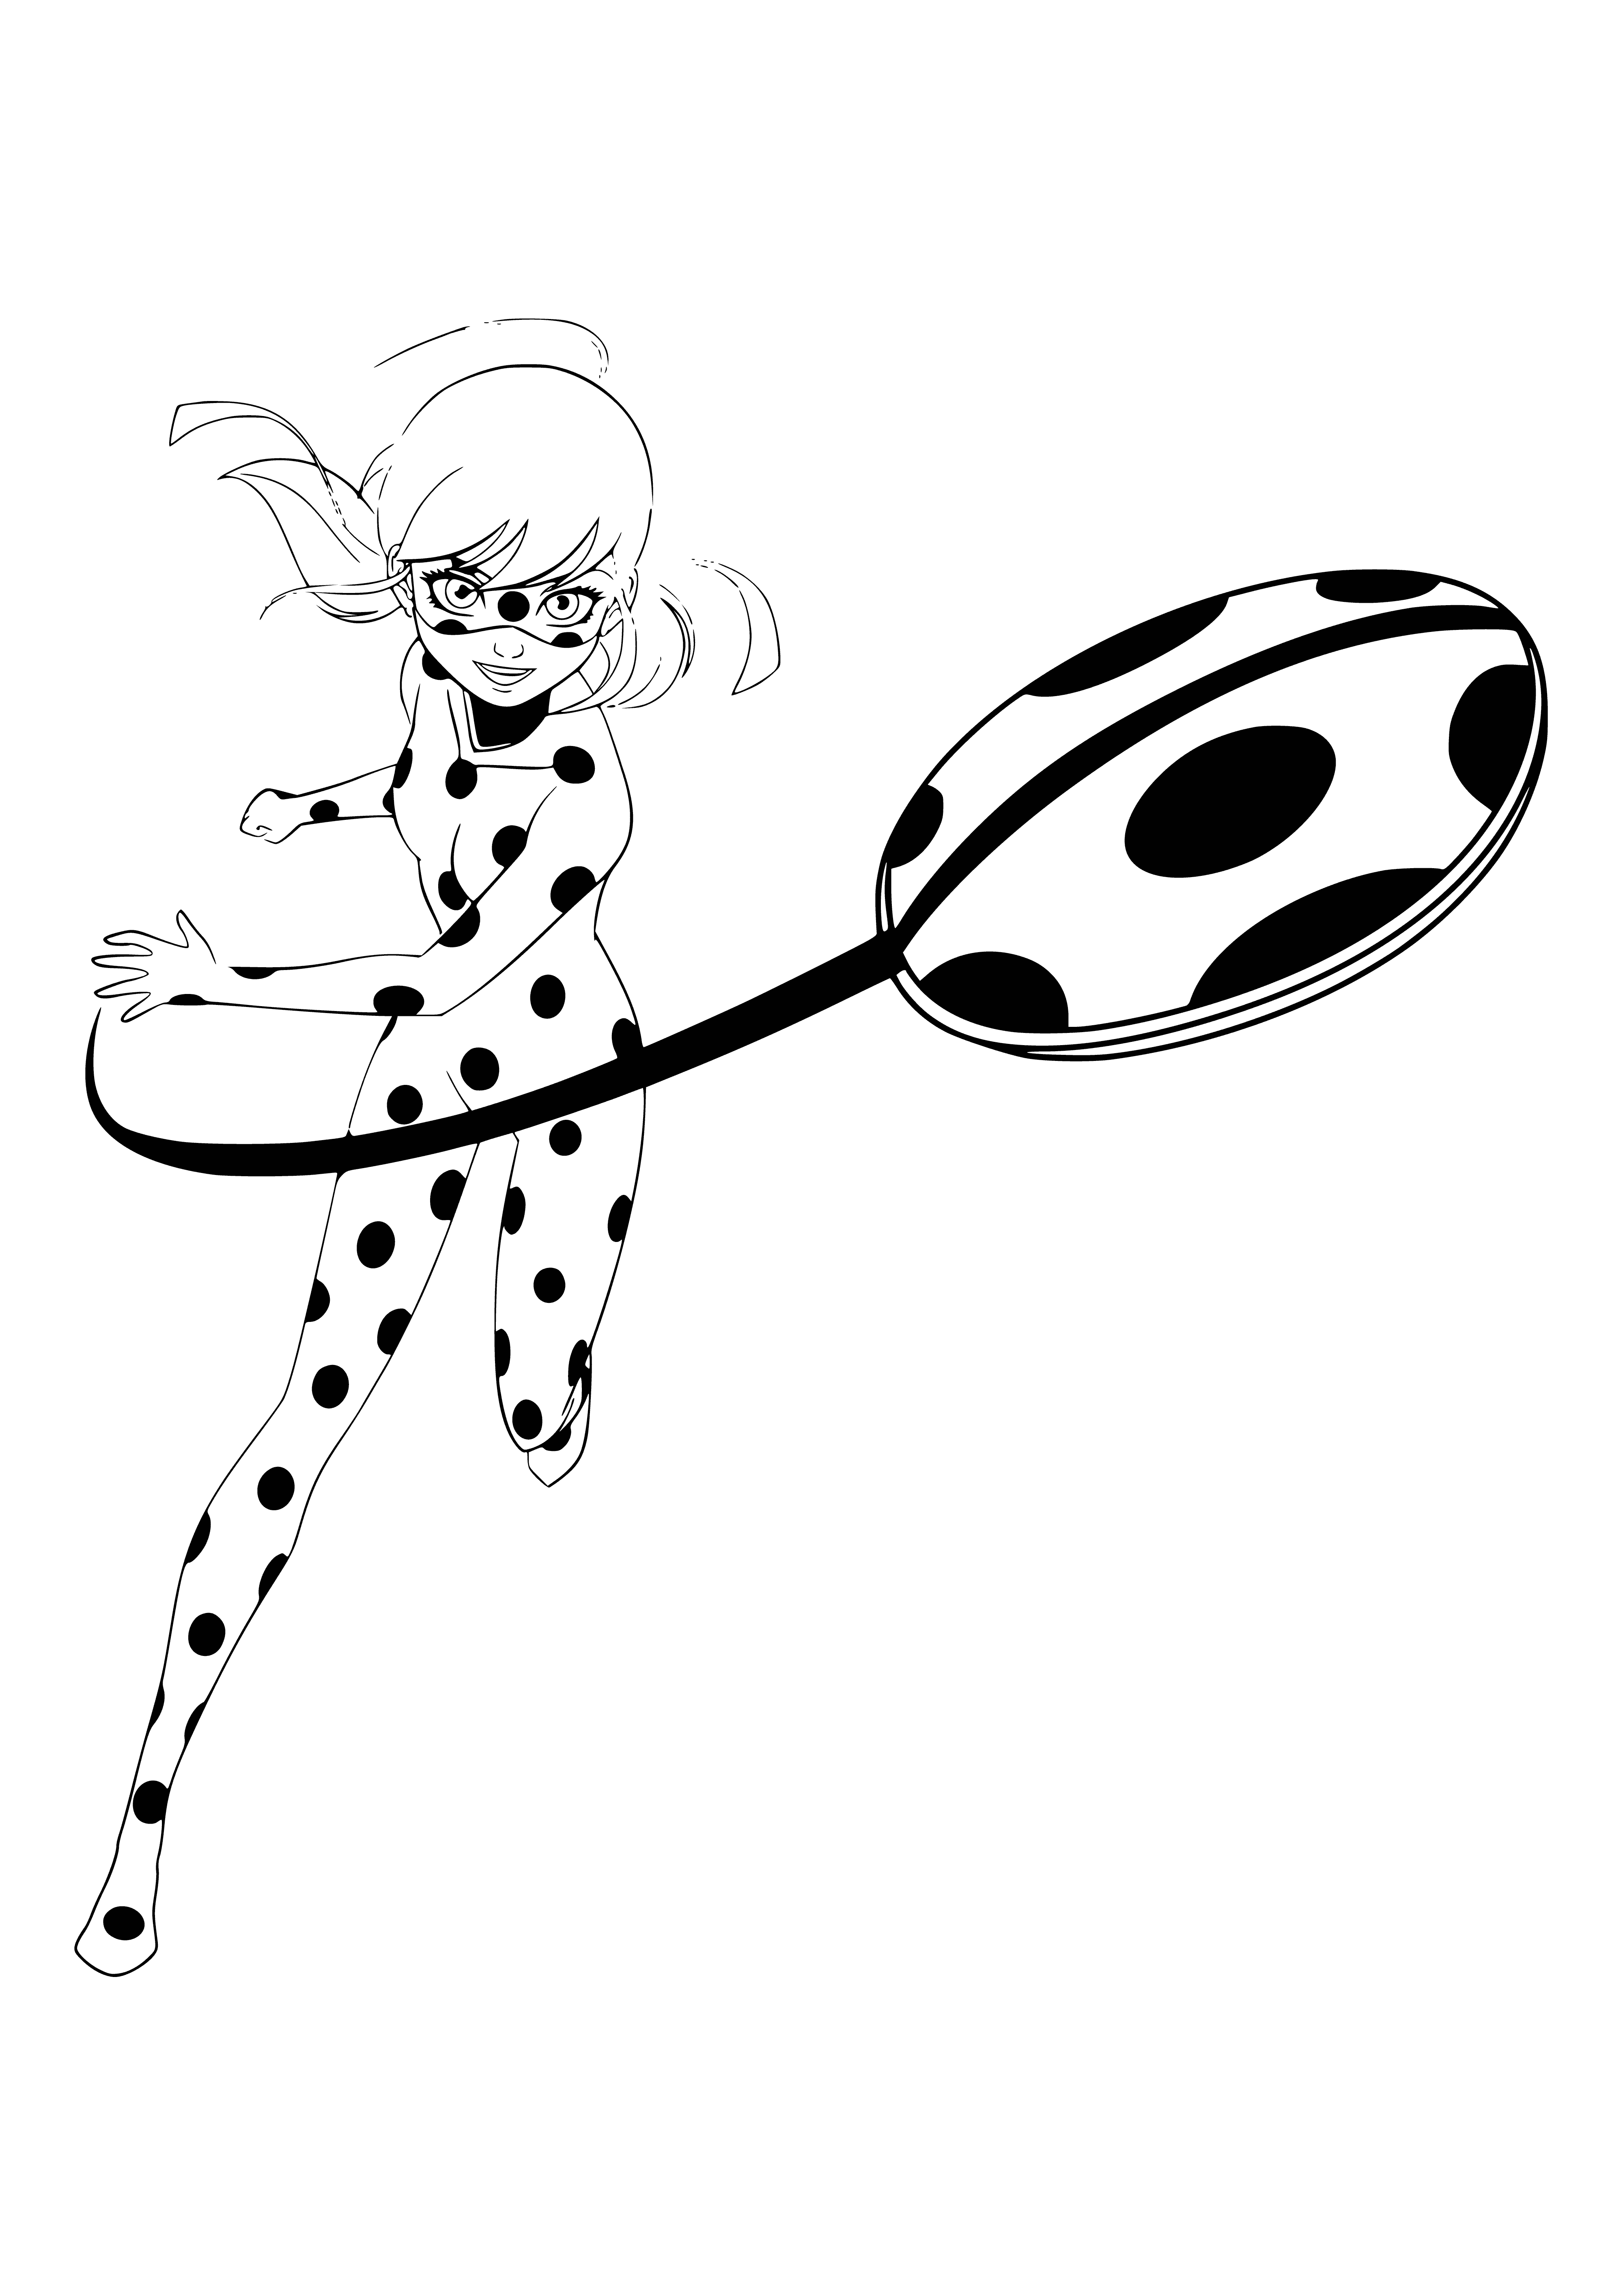 Lady Bug coloring page